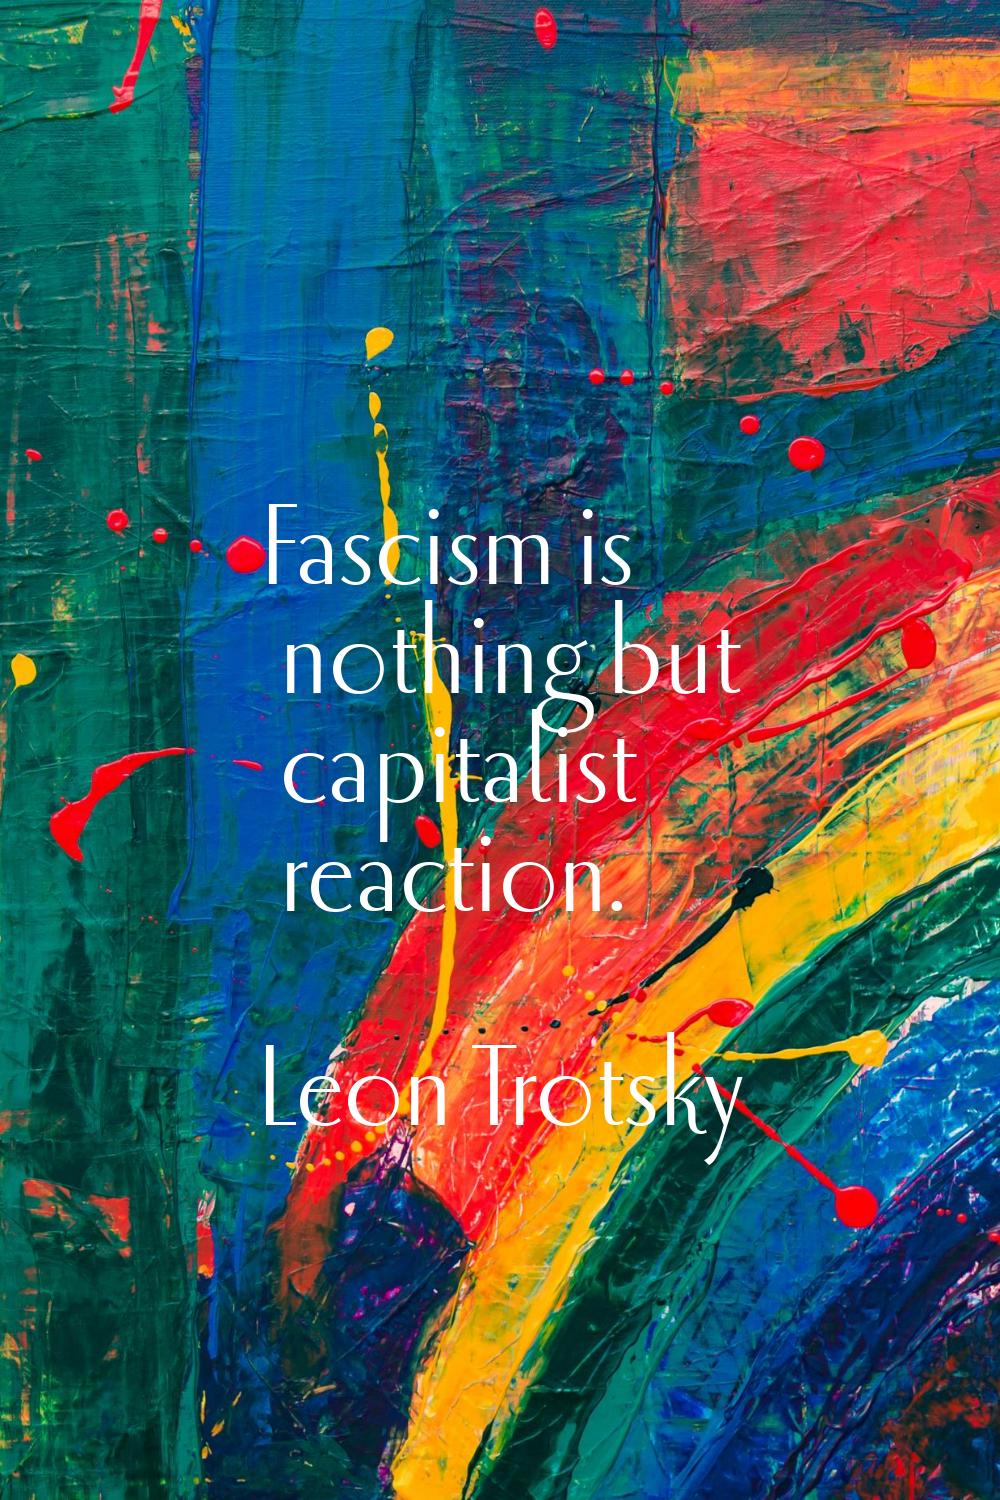 Fascism is nothing but capitalist reaction.